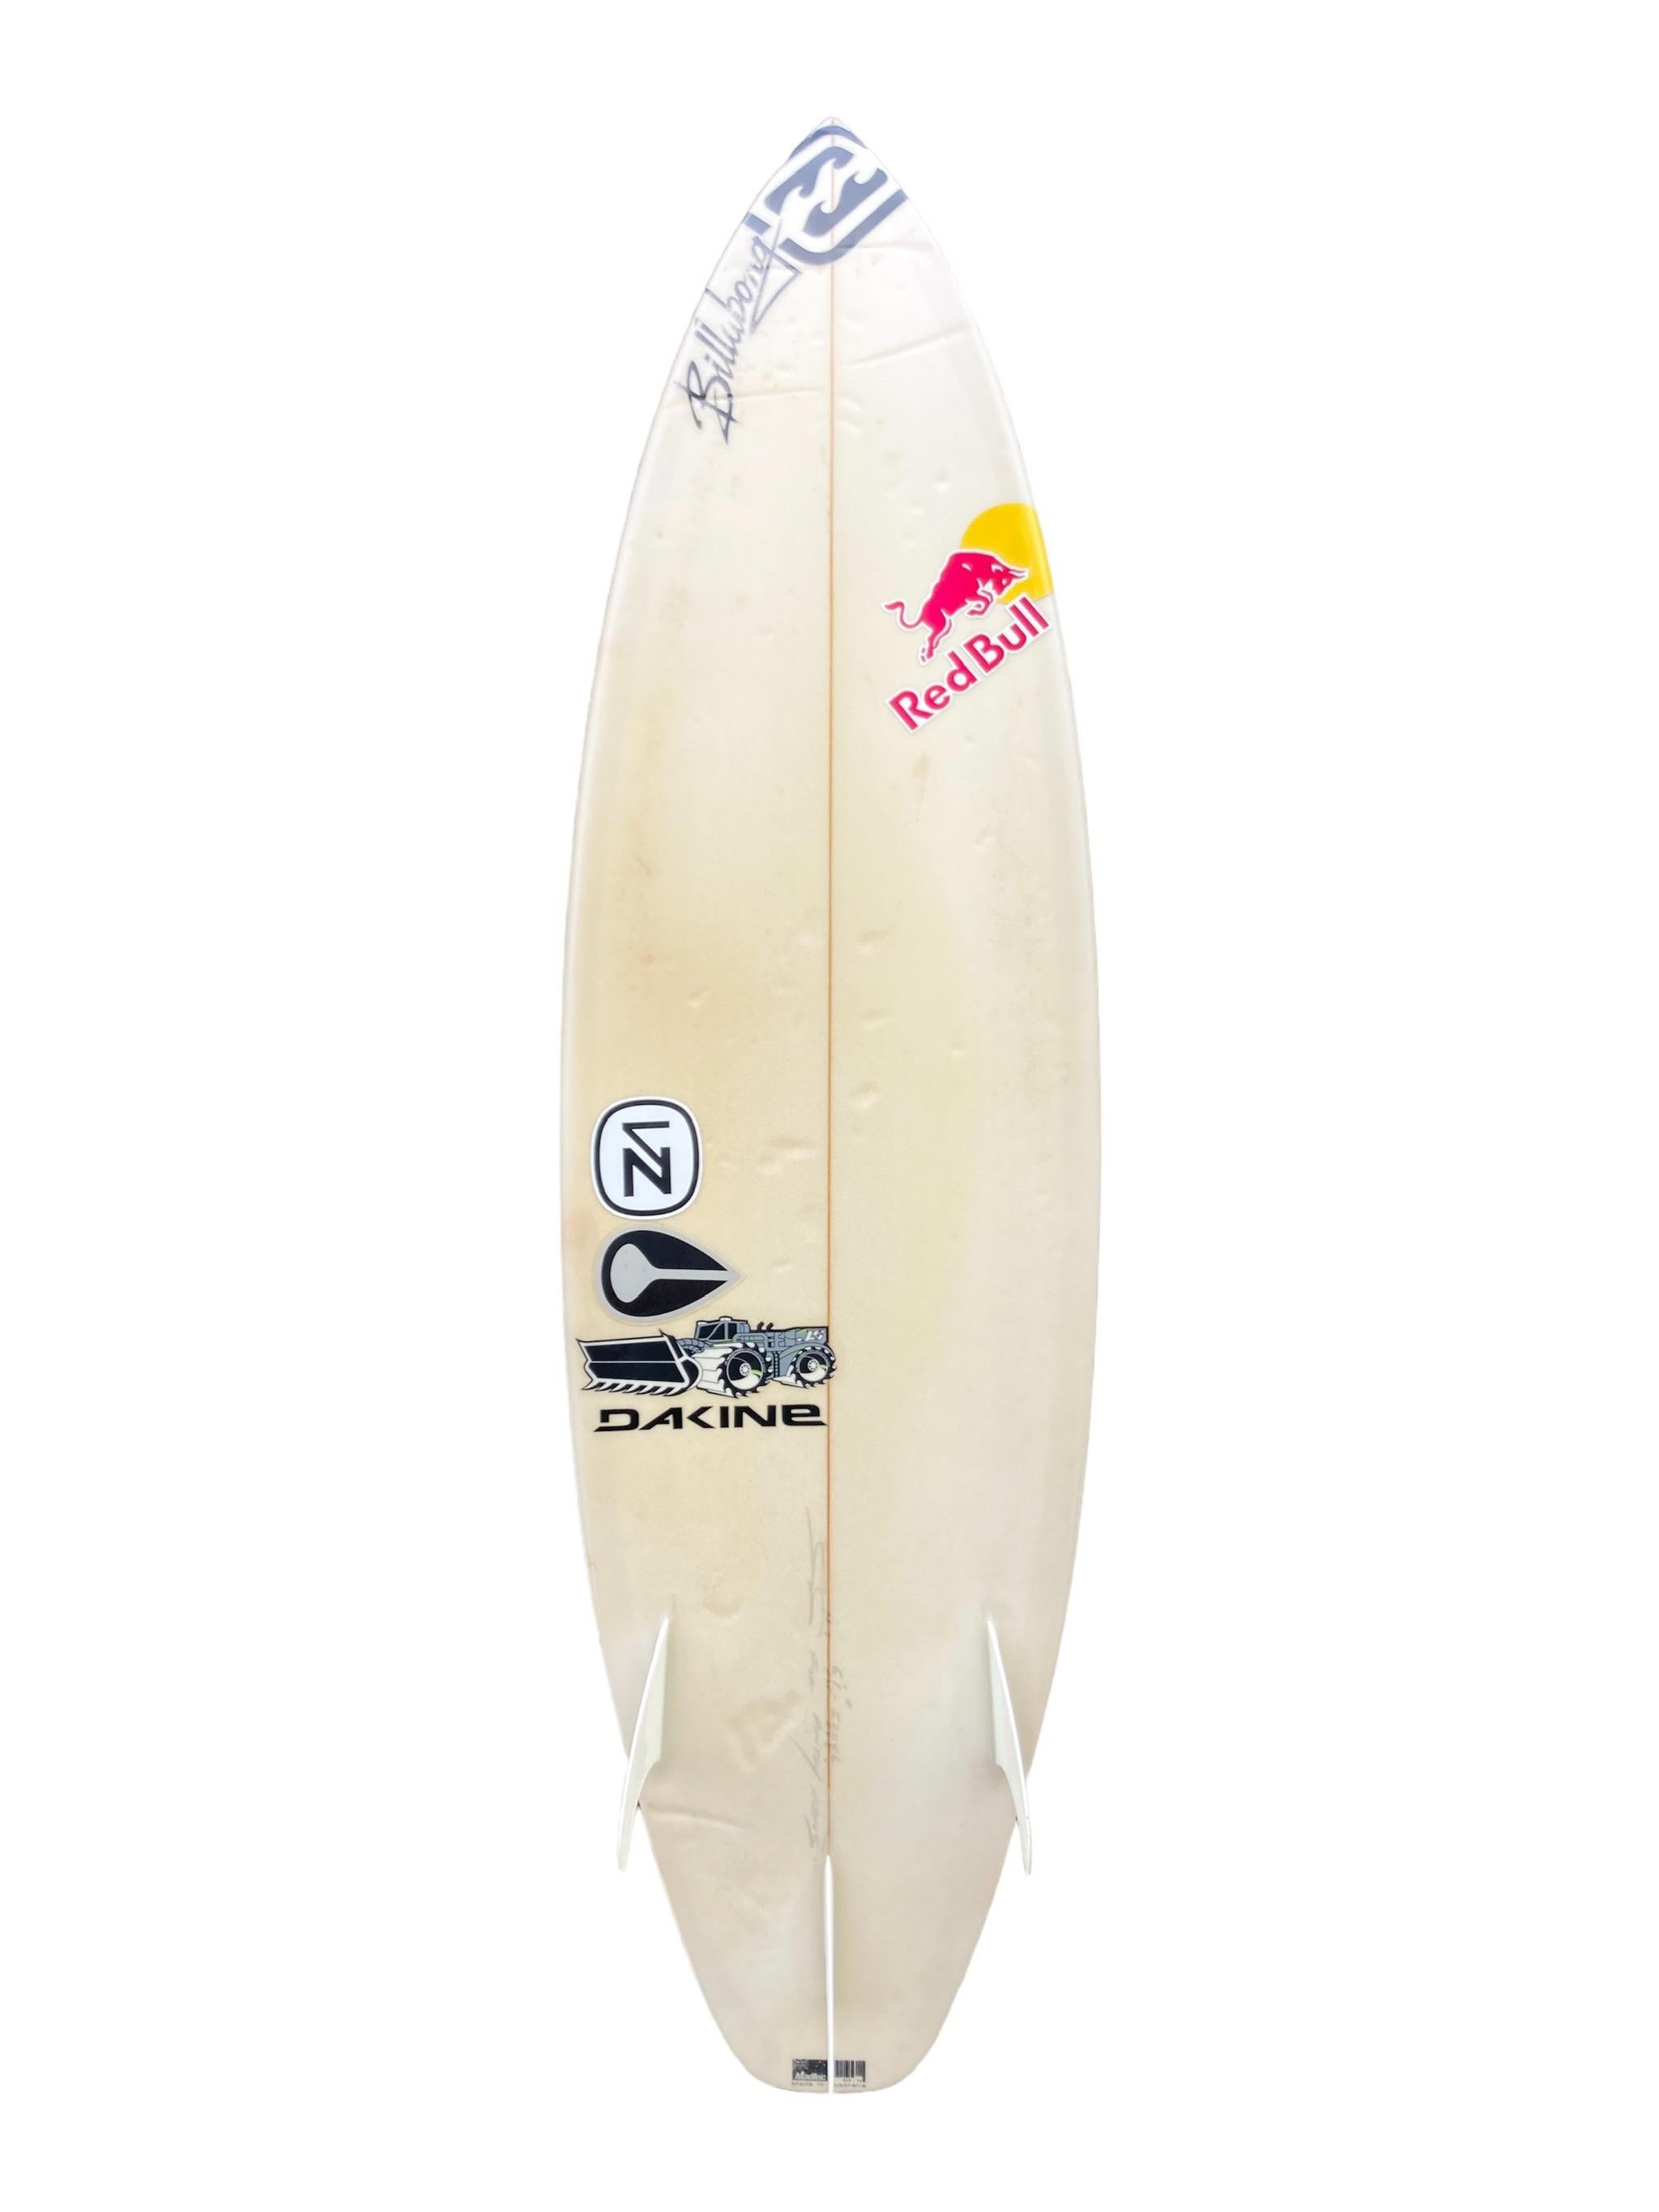 3-Time World Champion Andy Irons personal surfboard. JS Industries label squash tail with glass-on tri fins (thruster). The late Andy Irons (1978-2010) was the 3X consecutive World Champion of Surfing, claiming victory in ‘02, ‘03, and ‘04. Andy